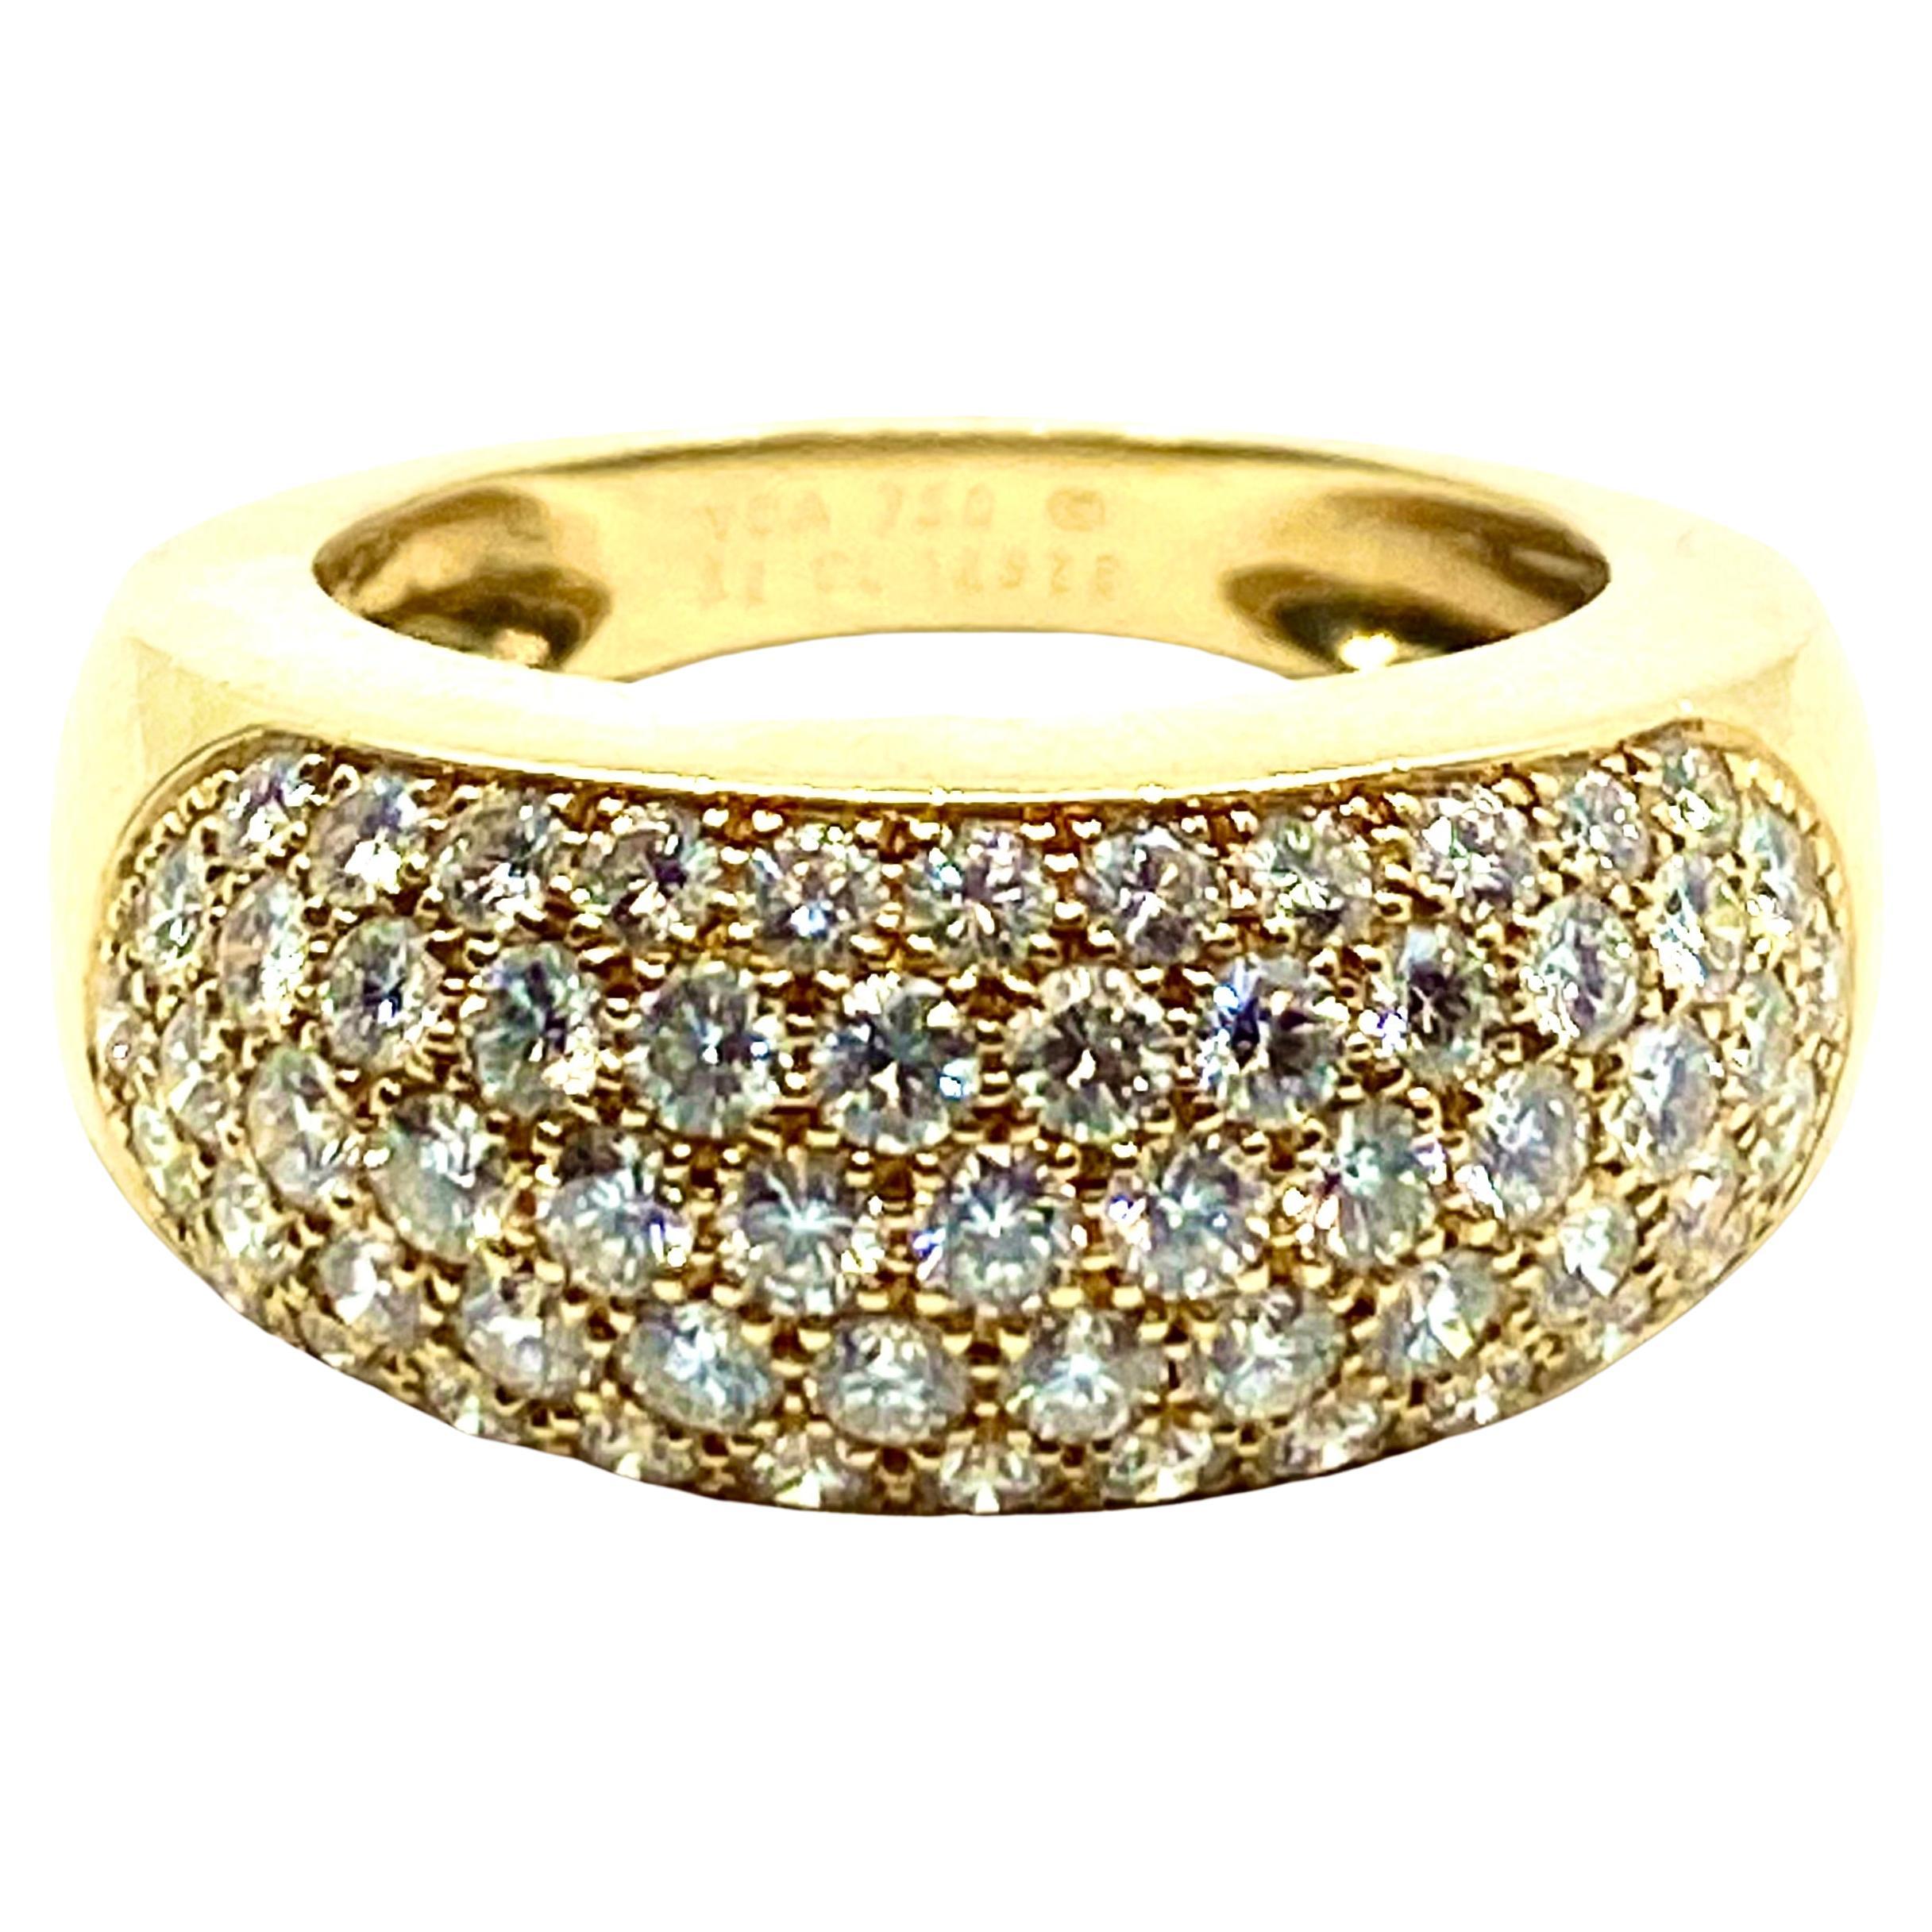 Van Cleef & Arpels Pave Diamond Gold Dome Ring In Excellent Condition For Sale In Beverly Hills, CA